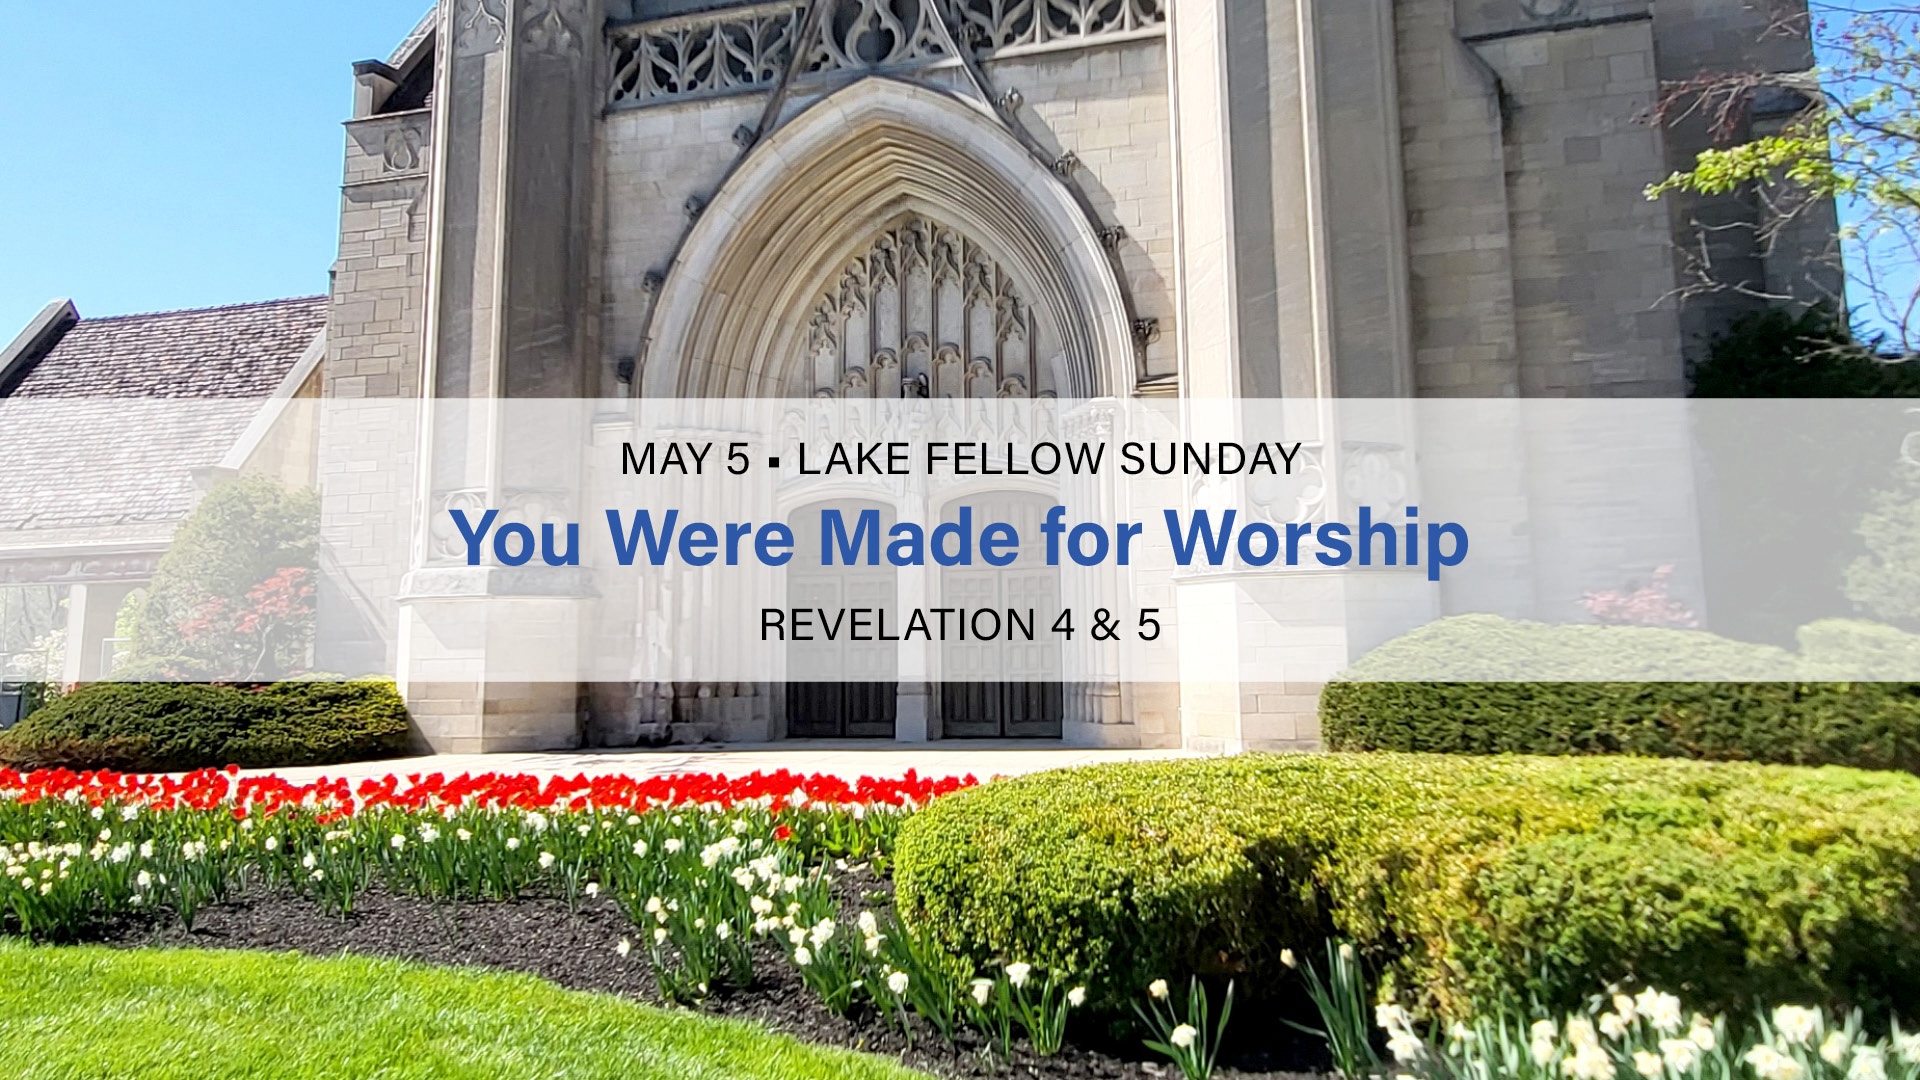 May 5 - You Were Made for Worship